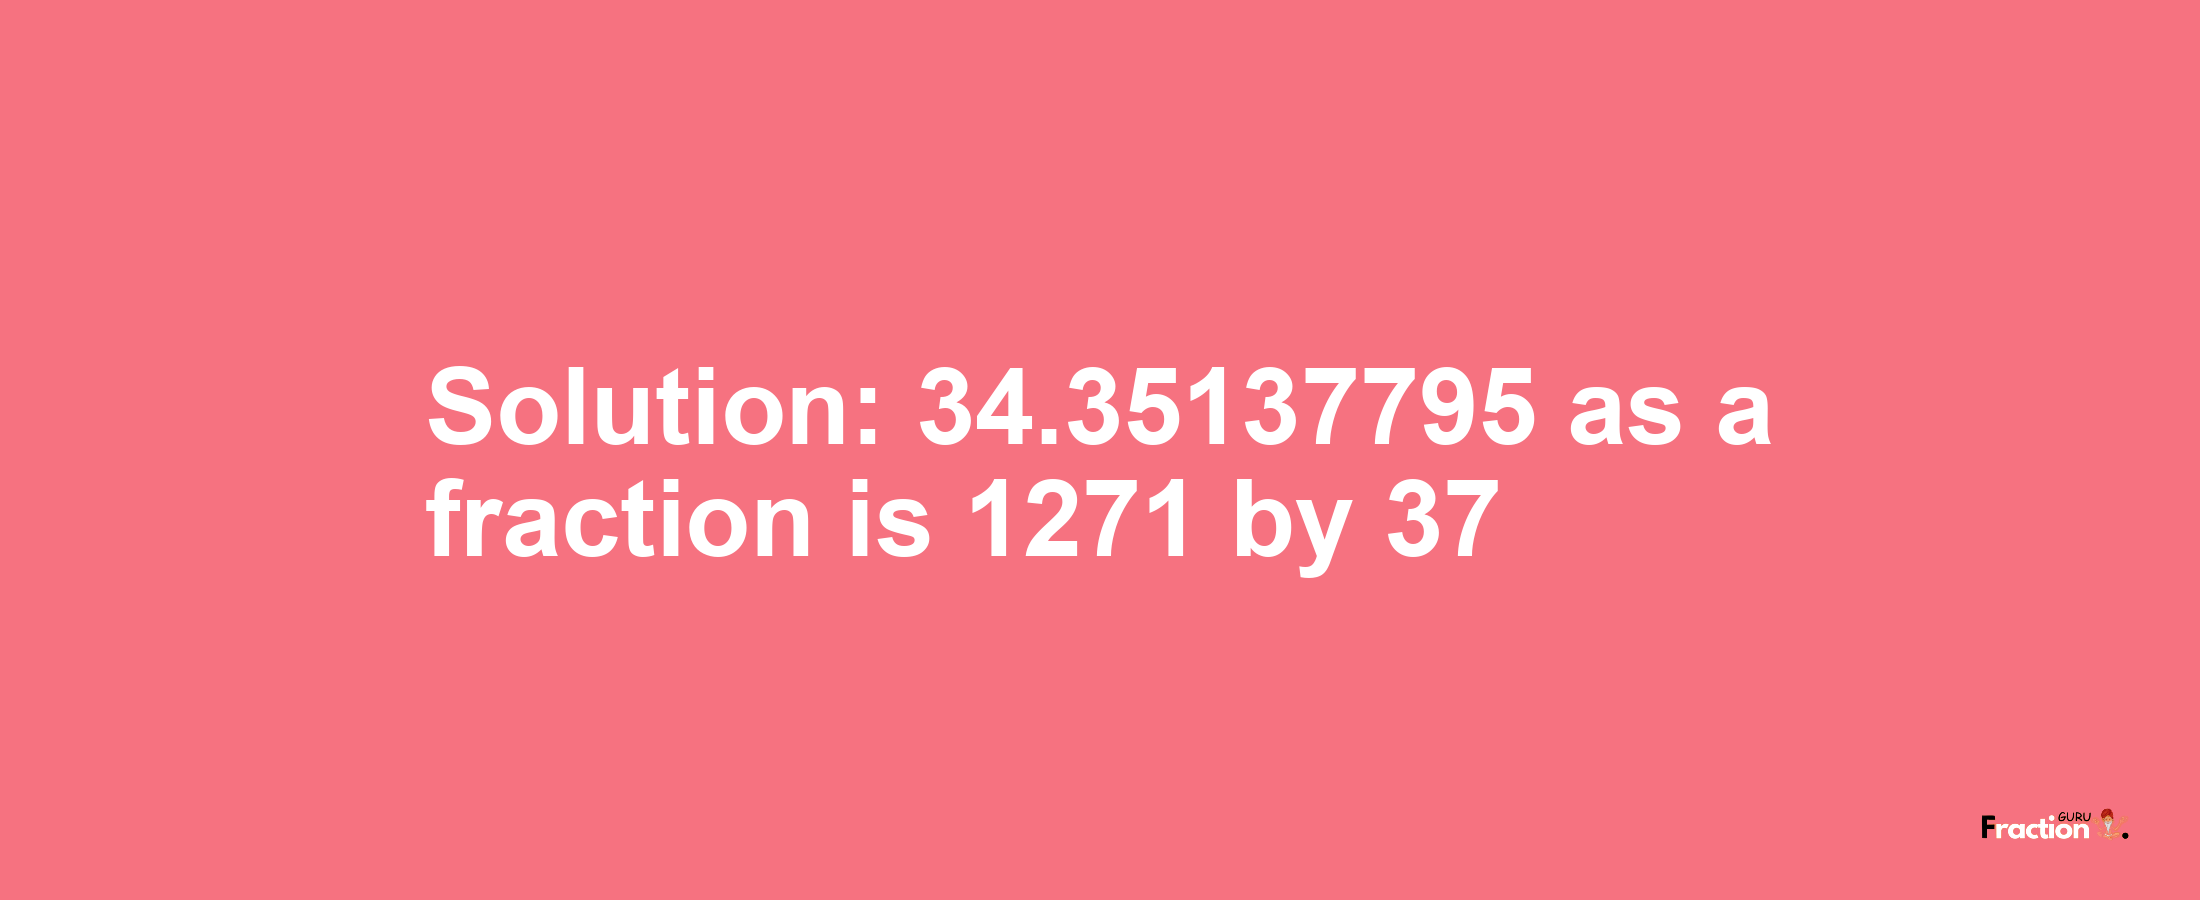 Solution:34.35137795 as a fraction is 1271/37